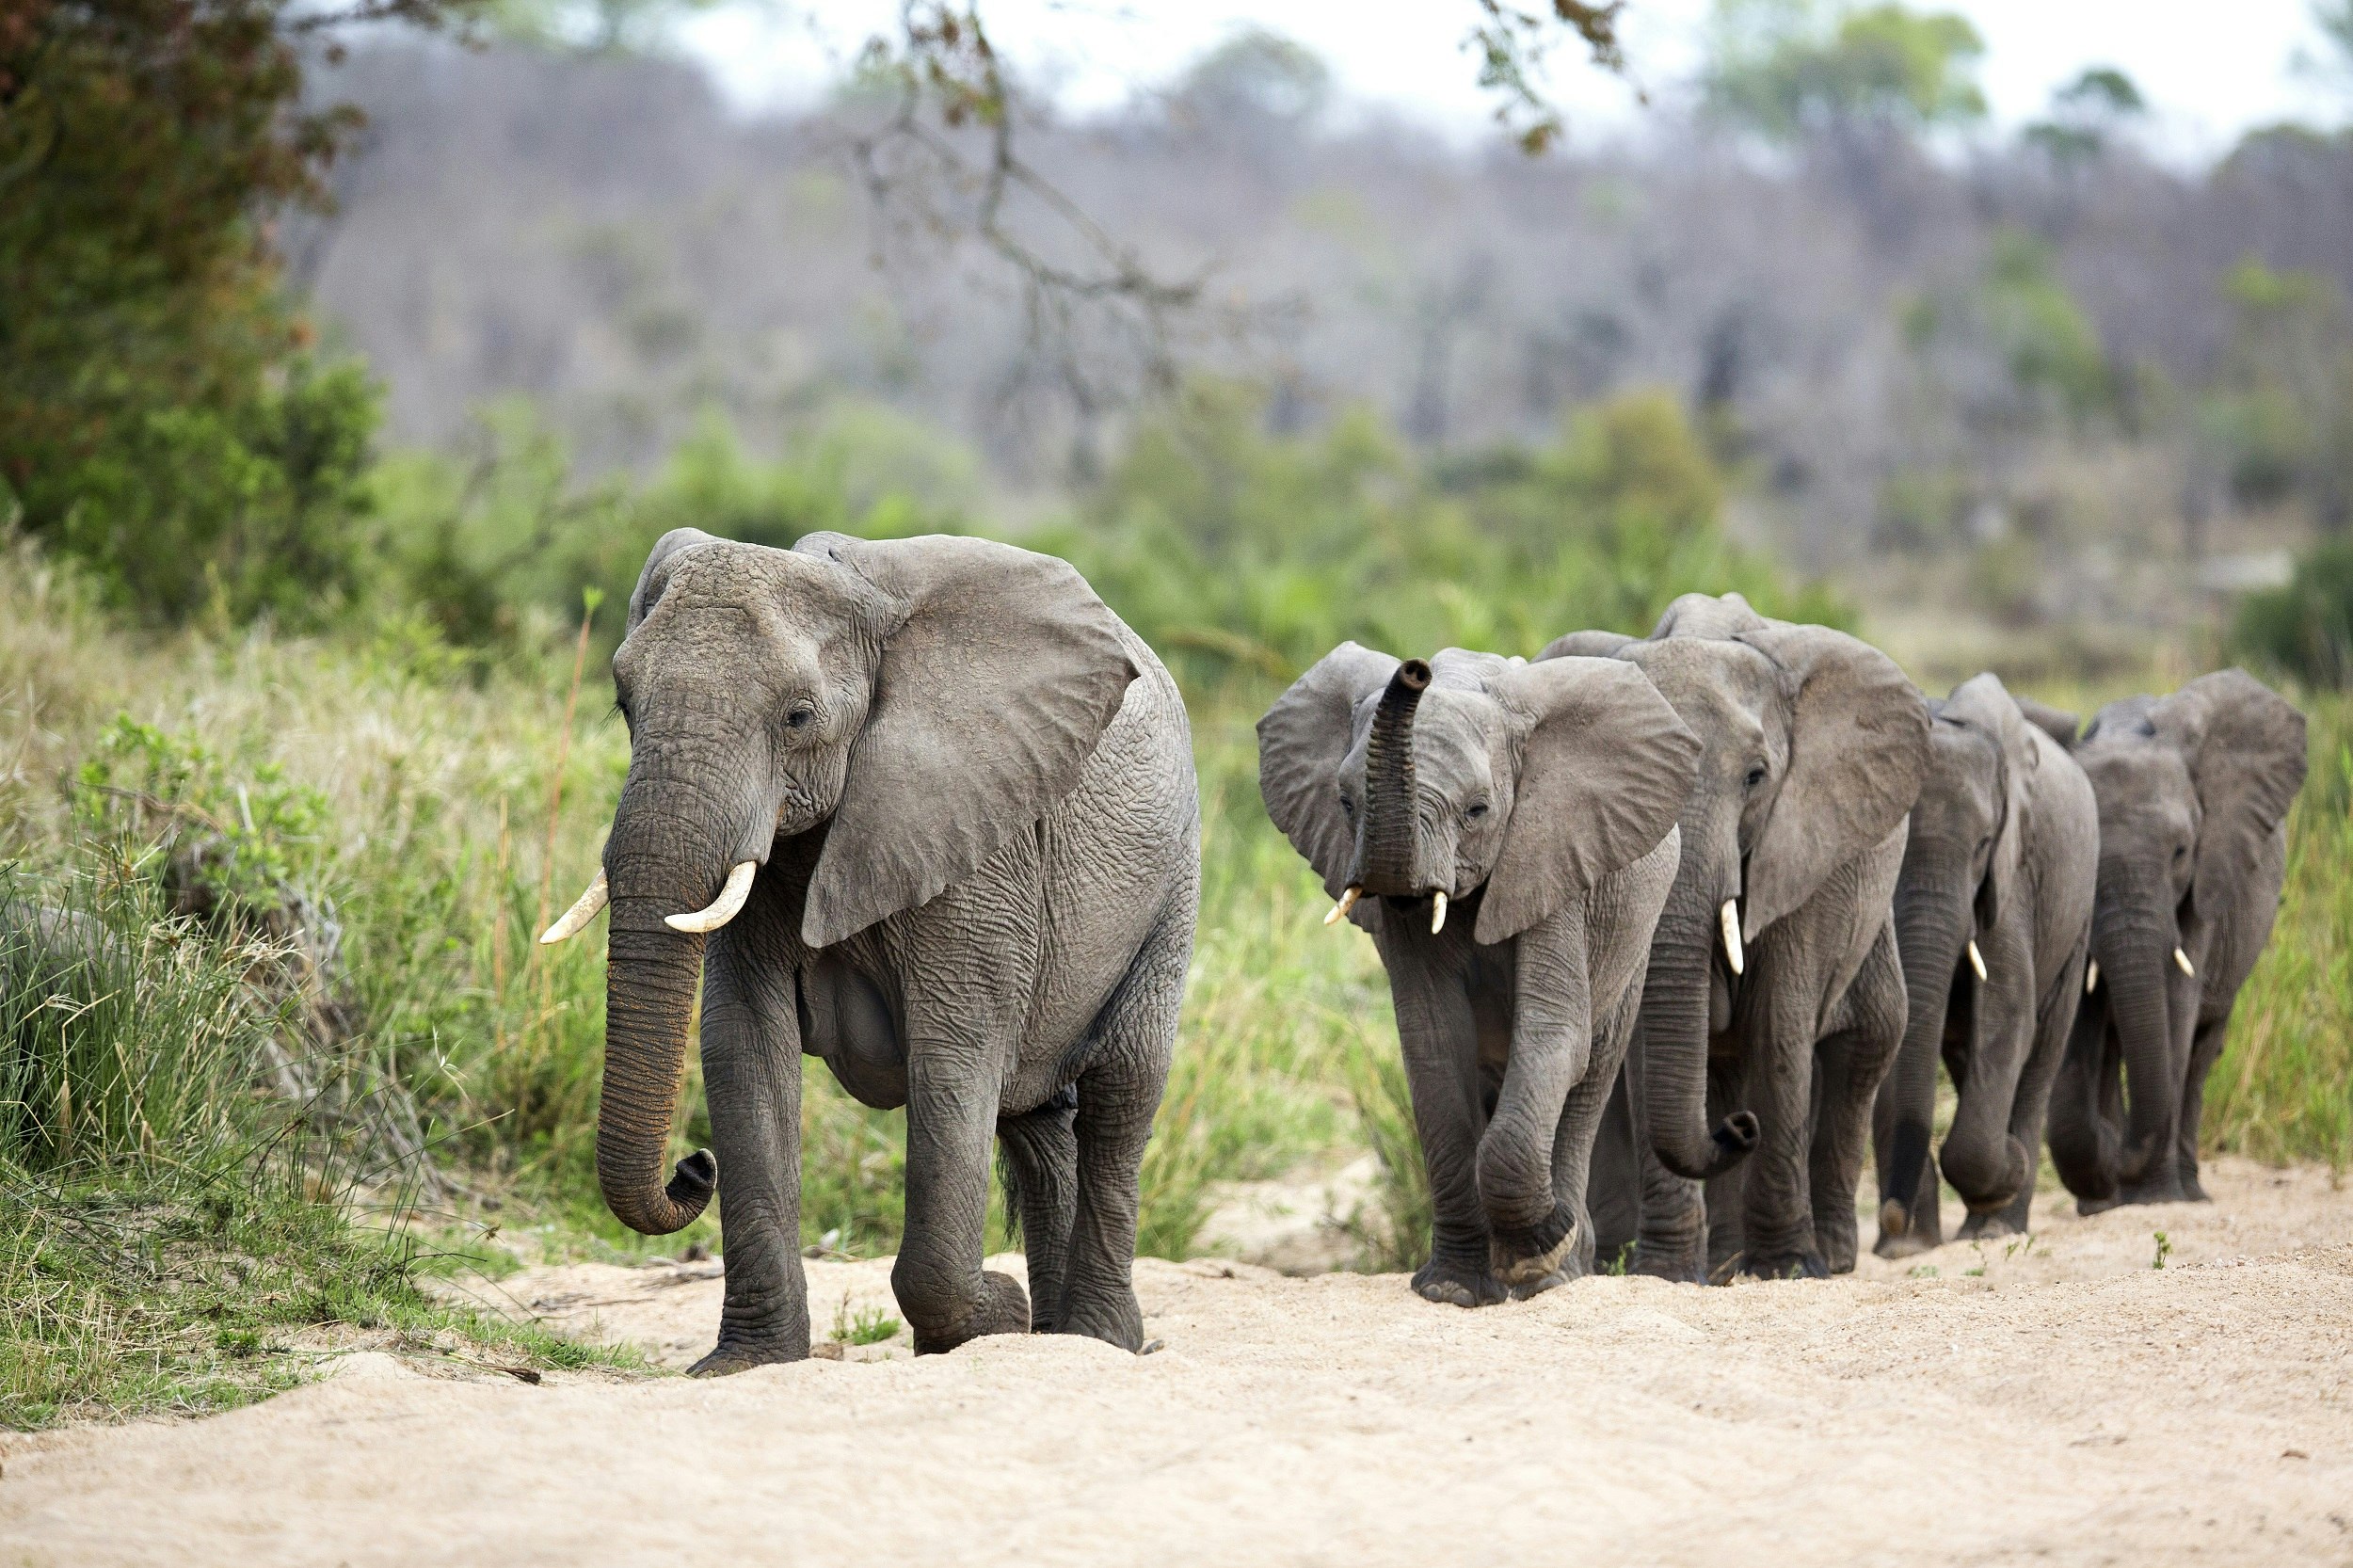 A long line of elephants walk along a sandy riverbed, with lush vegetation to their left.